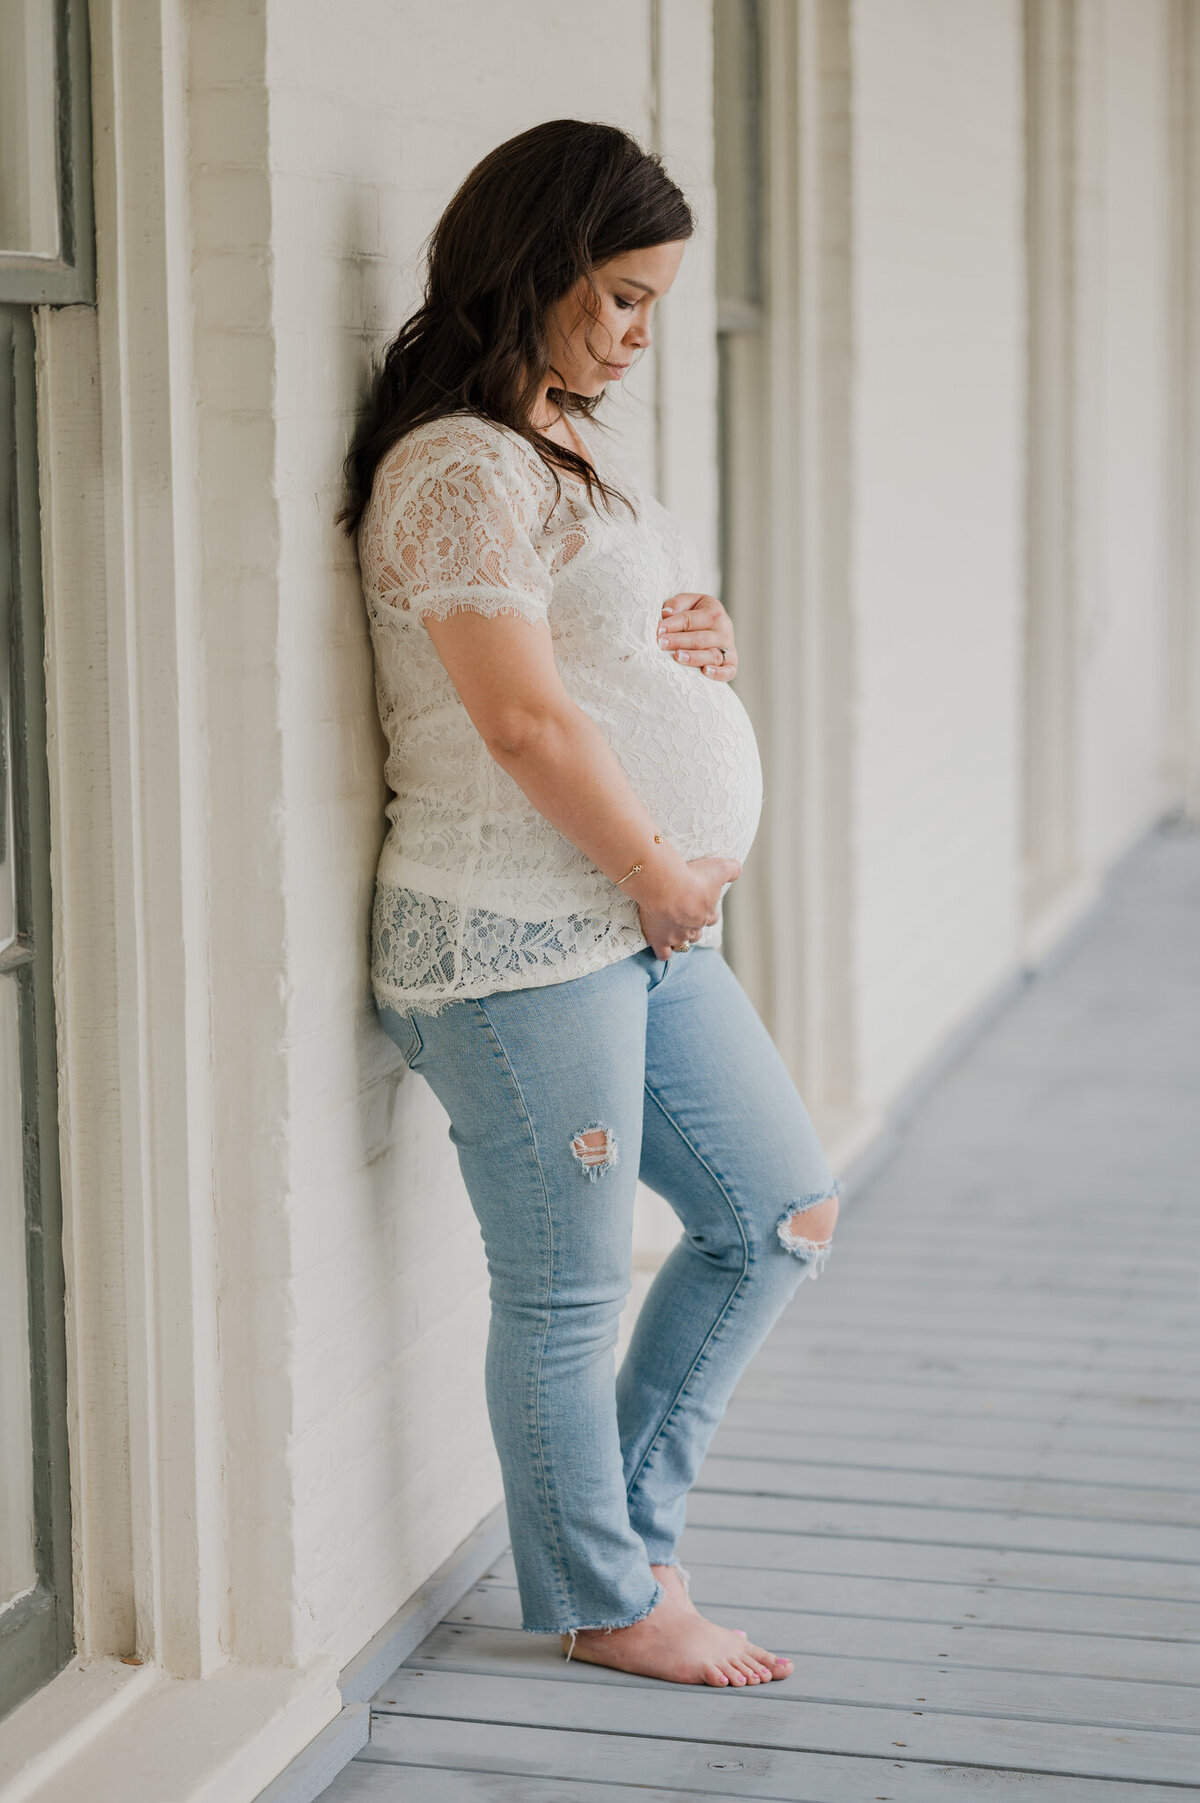 San Antonio maternity photography of a woman in jeans and a lace shirt leaning against a building.